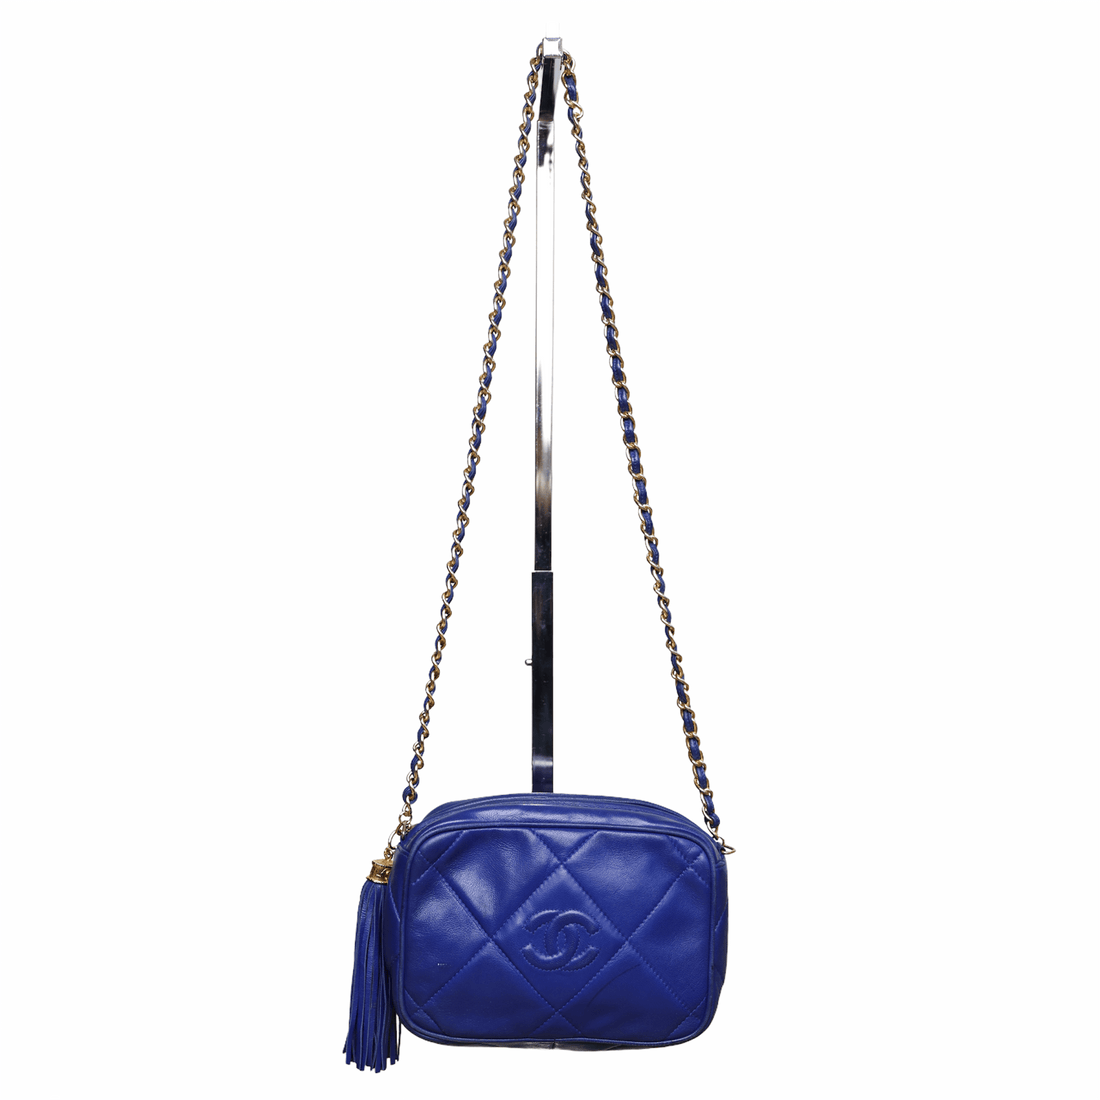 Chanel Navy Blue Diamond Quilted Leather Vintage CC Camera Tassel Bag  Chanel | The Luxury Closet